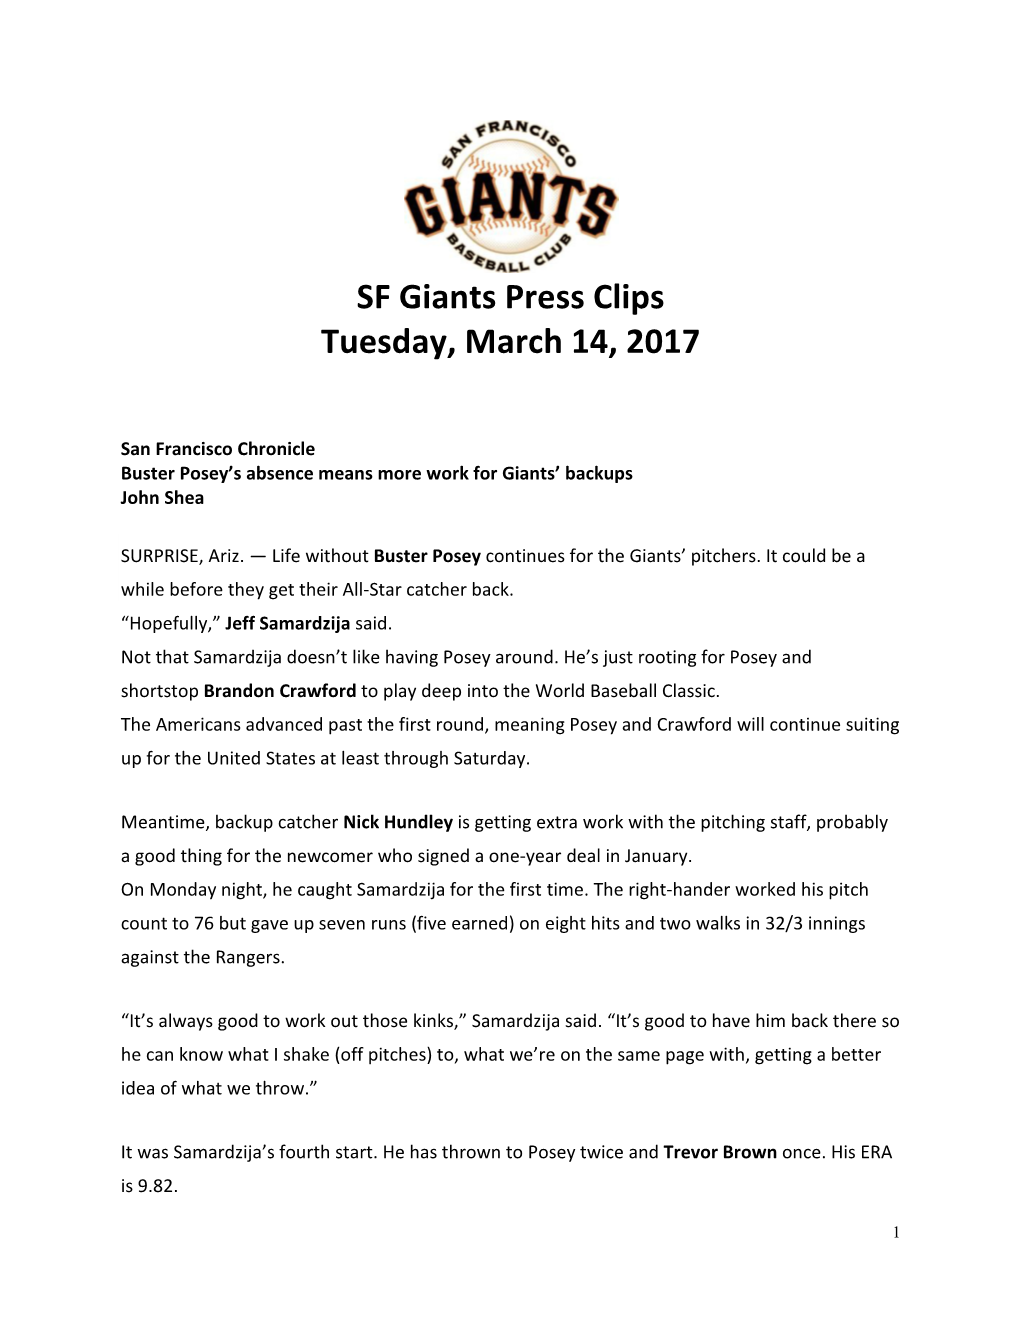 SF Giants Press Clips Tuesday, March 14, 2017